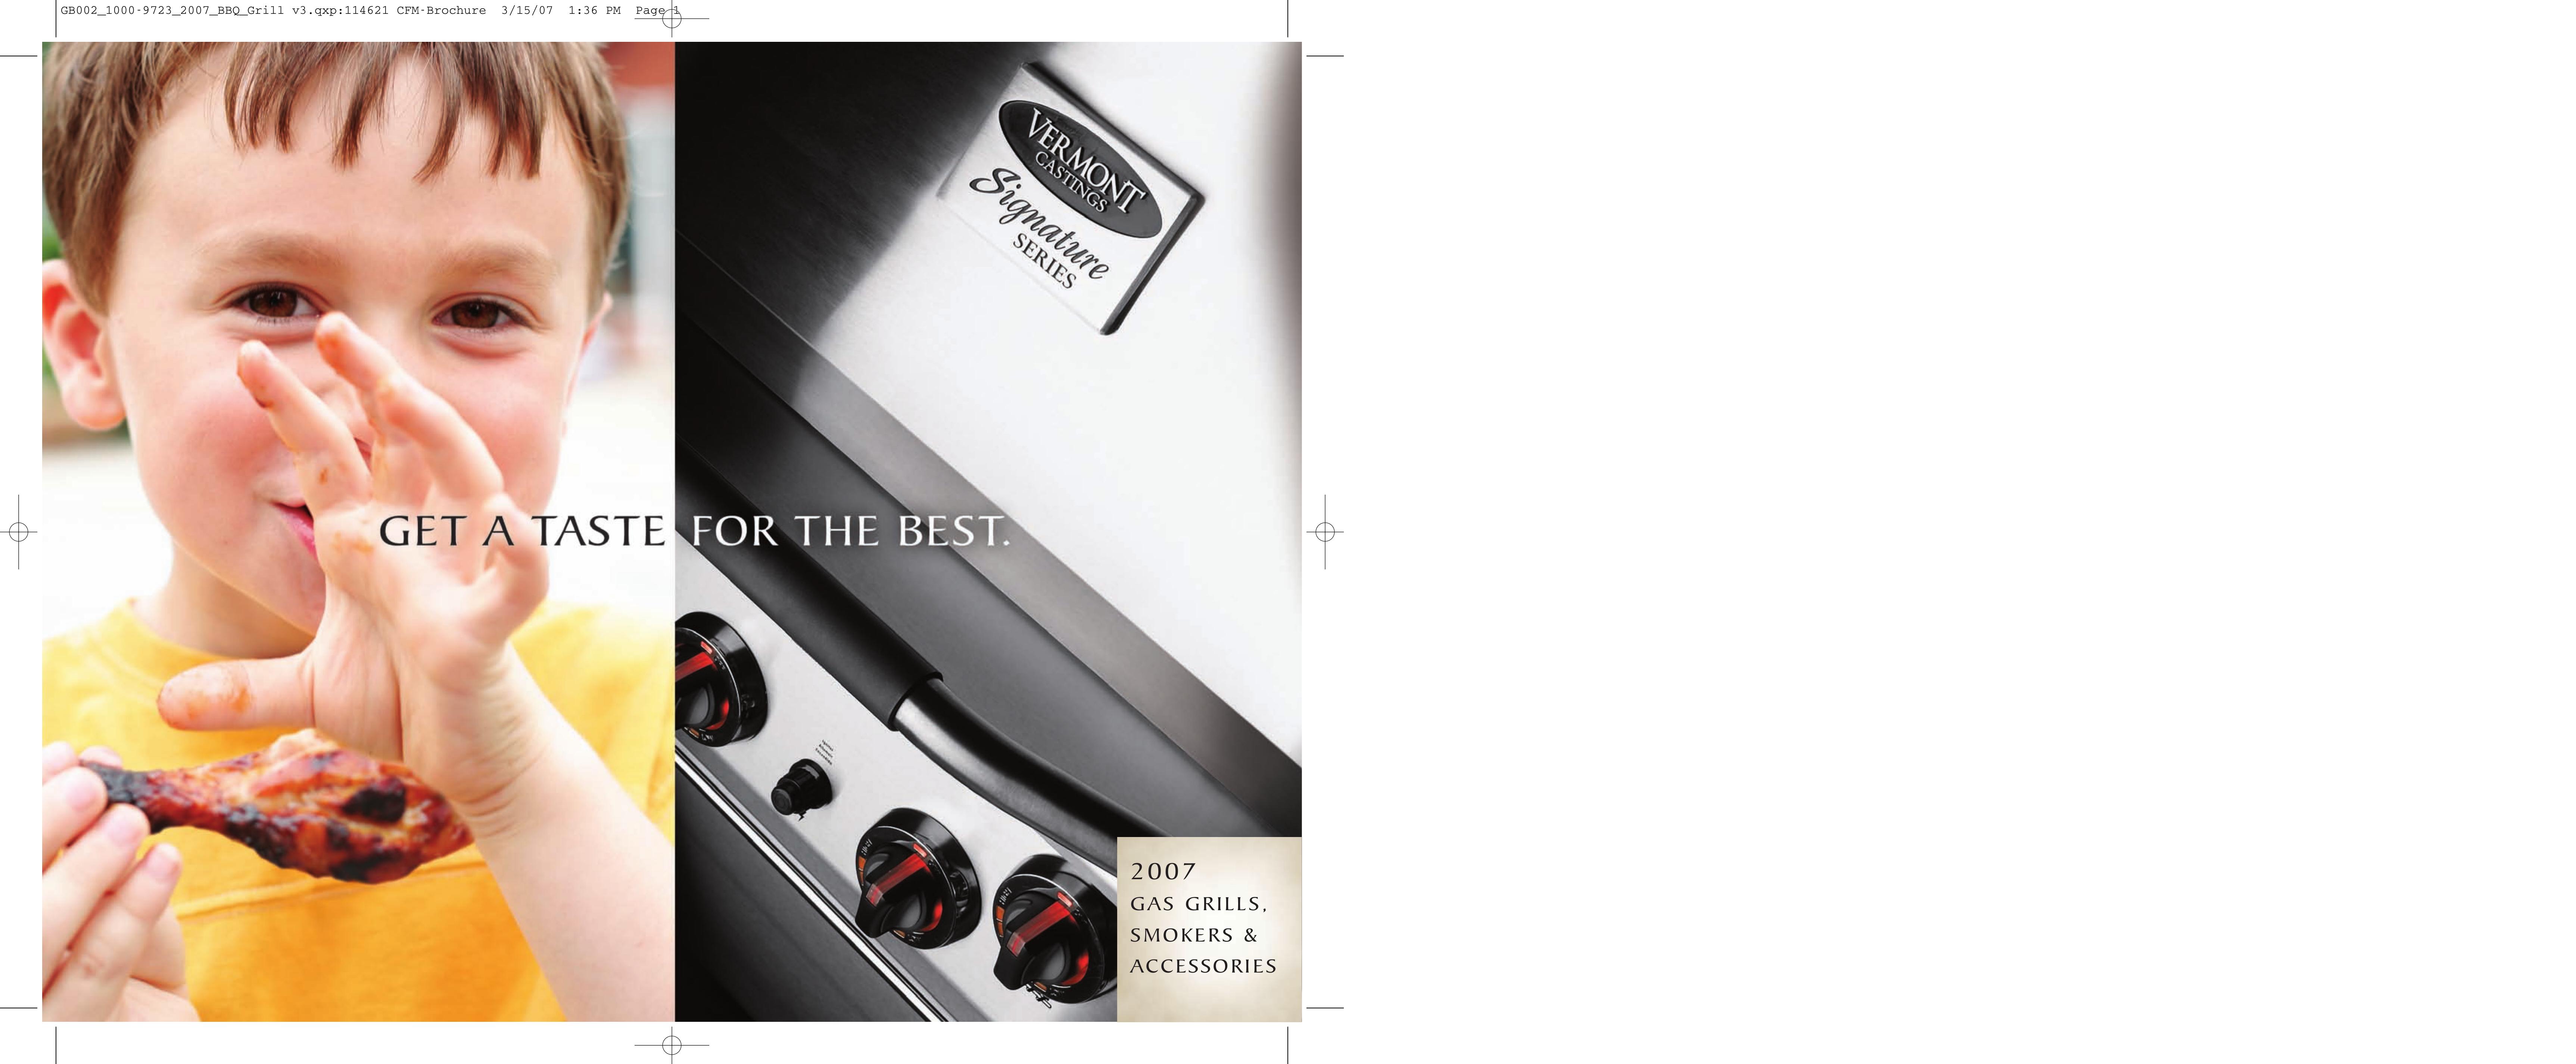 Vermont Casting VCS3507 Gas Grill User Manual